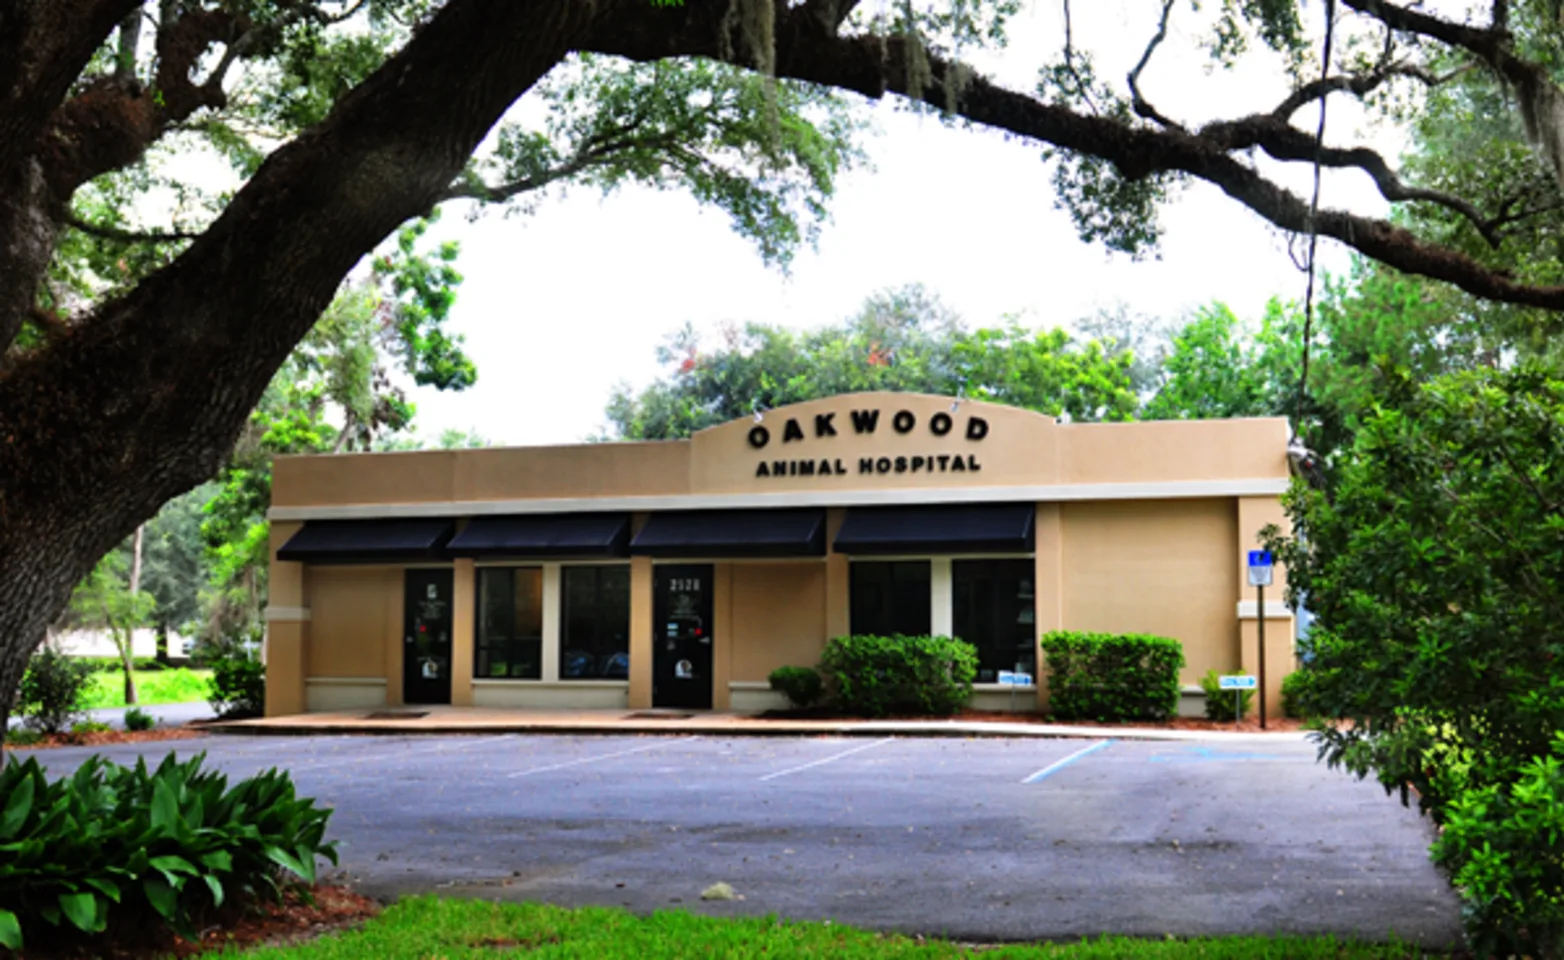 Oakwood Animal Hospital Florida's front exterior of their building.